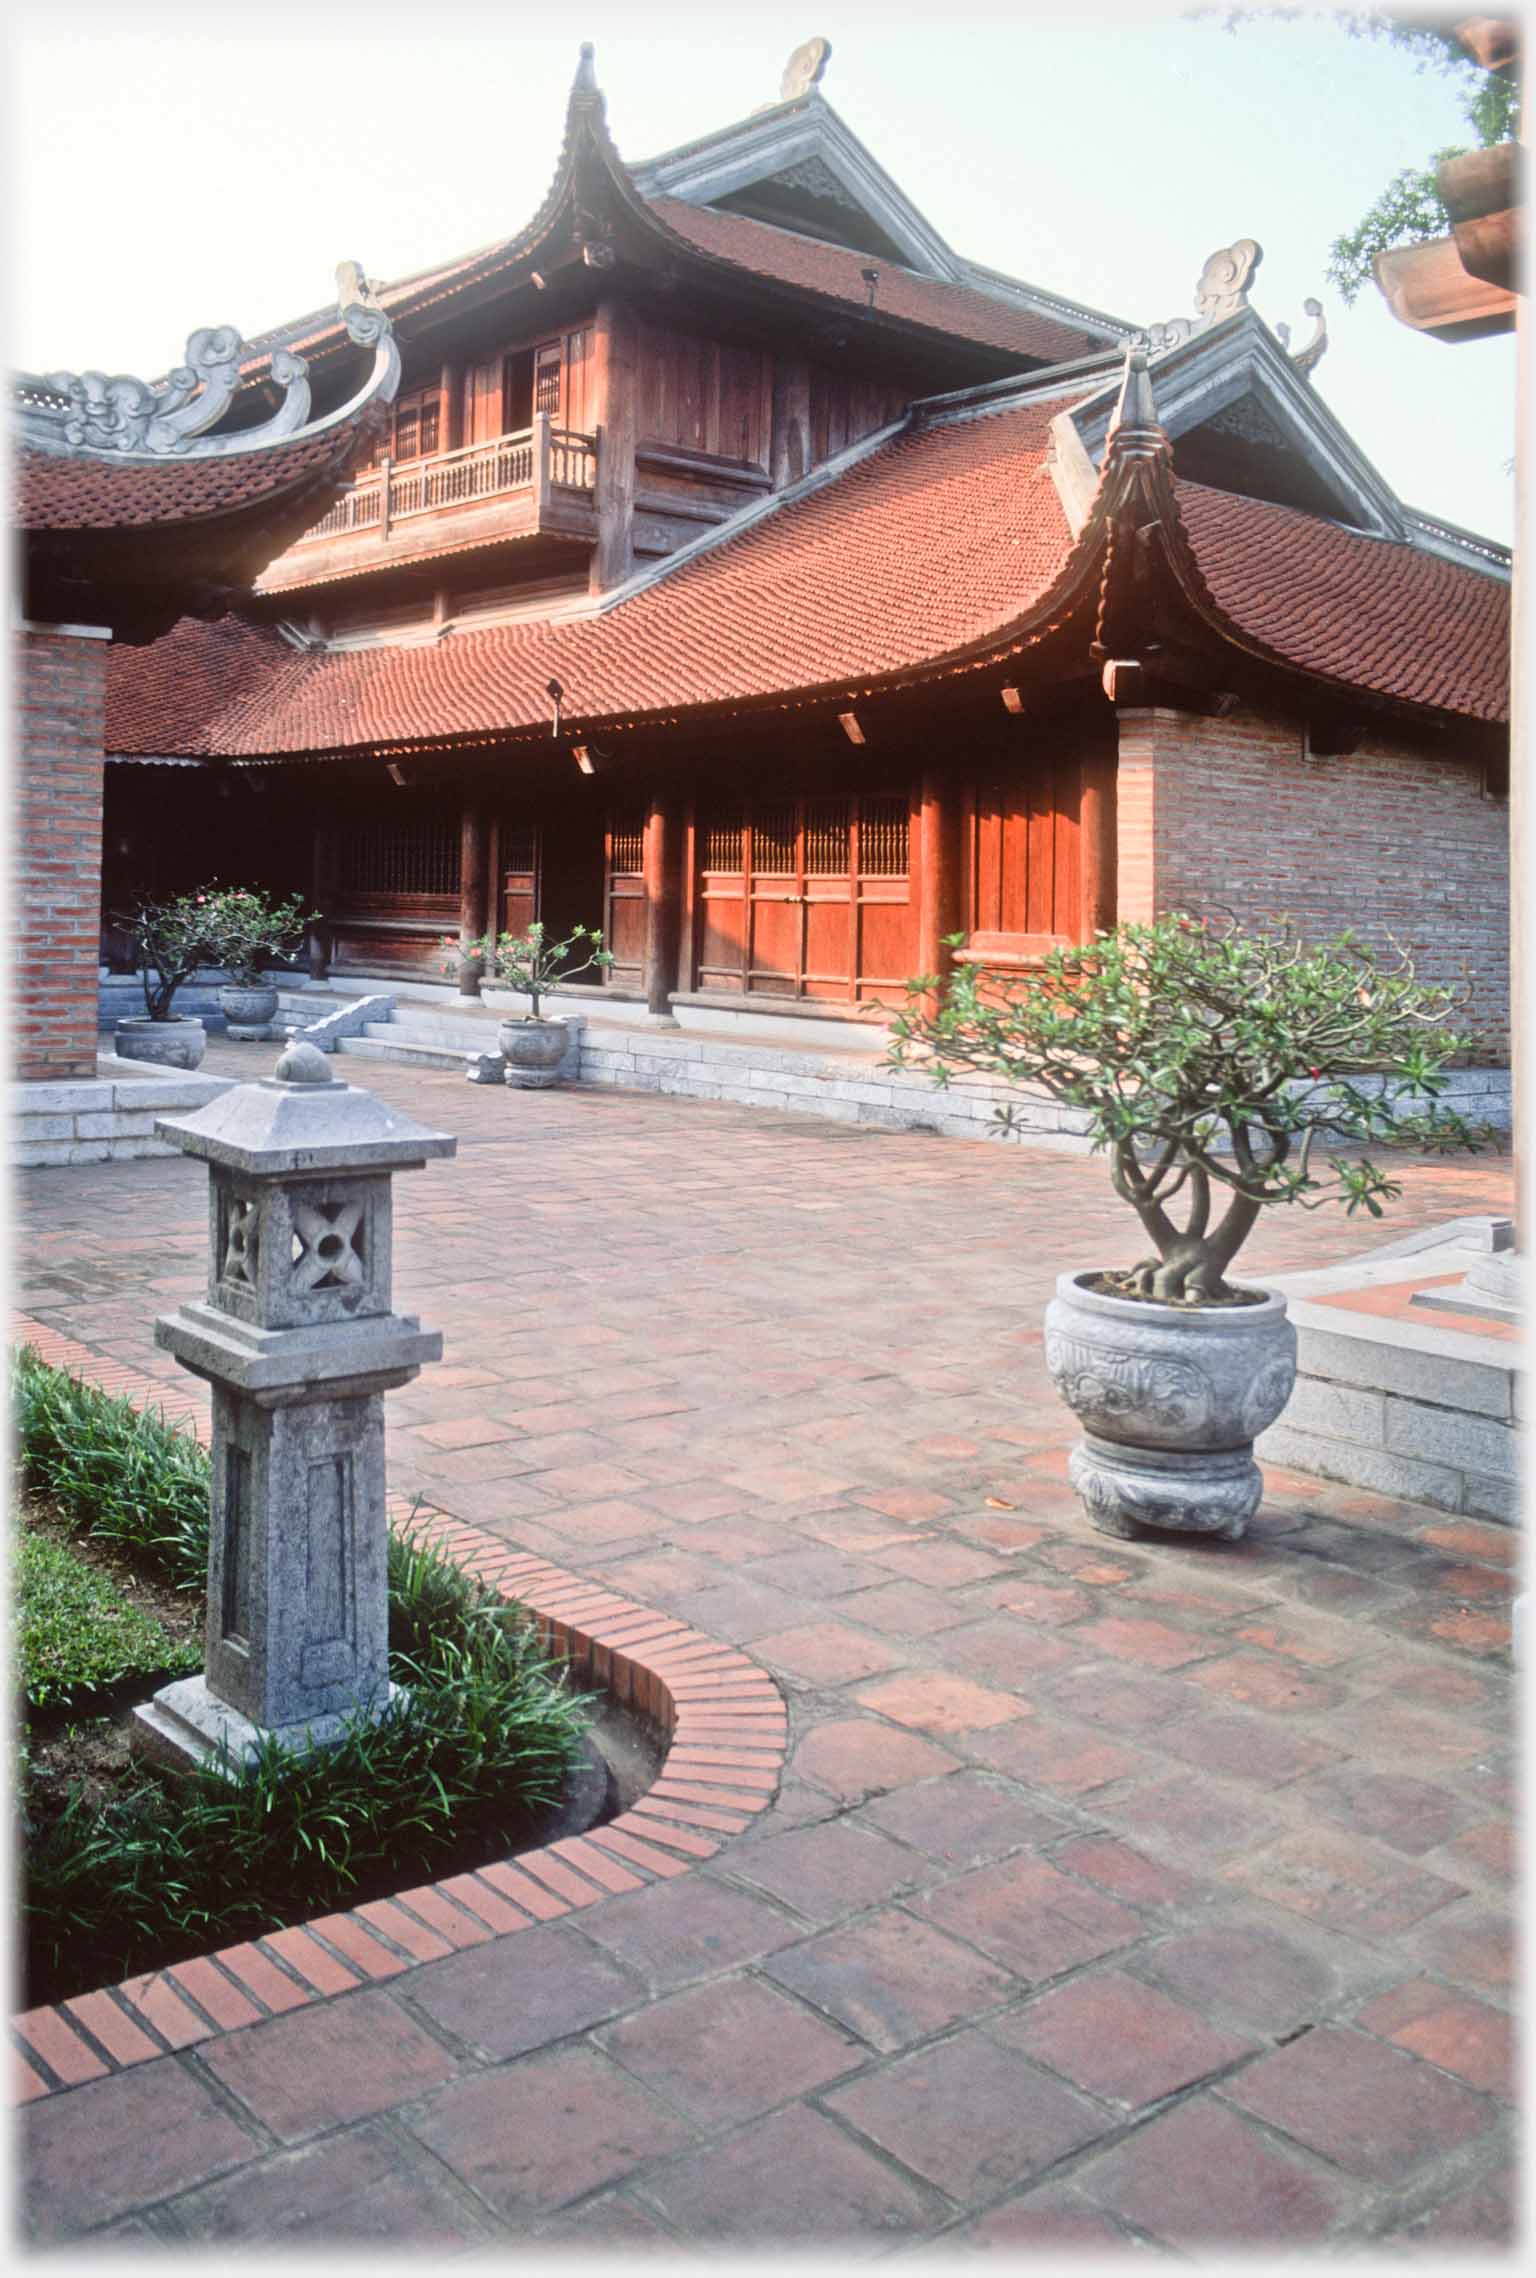 The two story building at the back of the Temple.